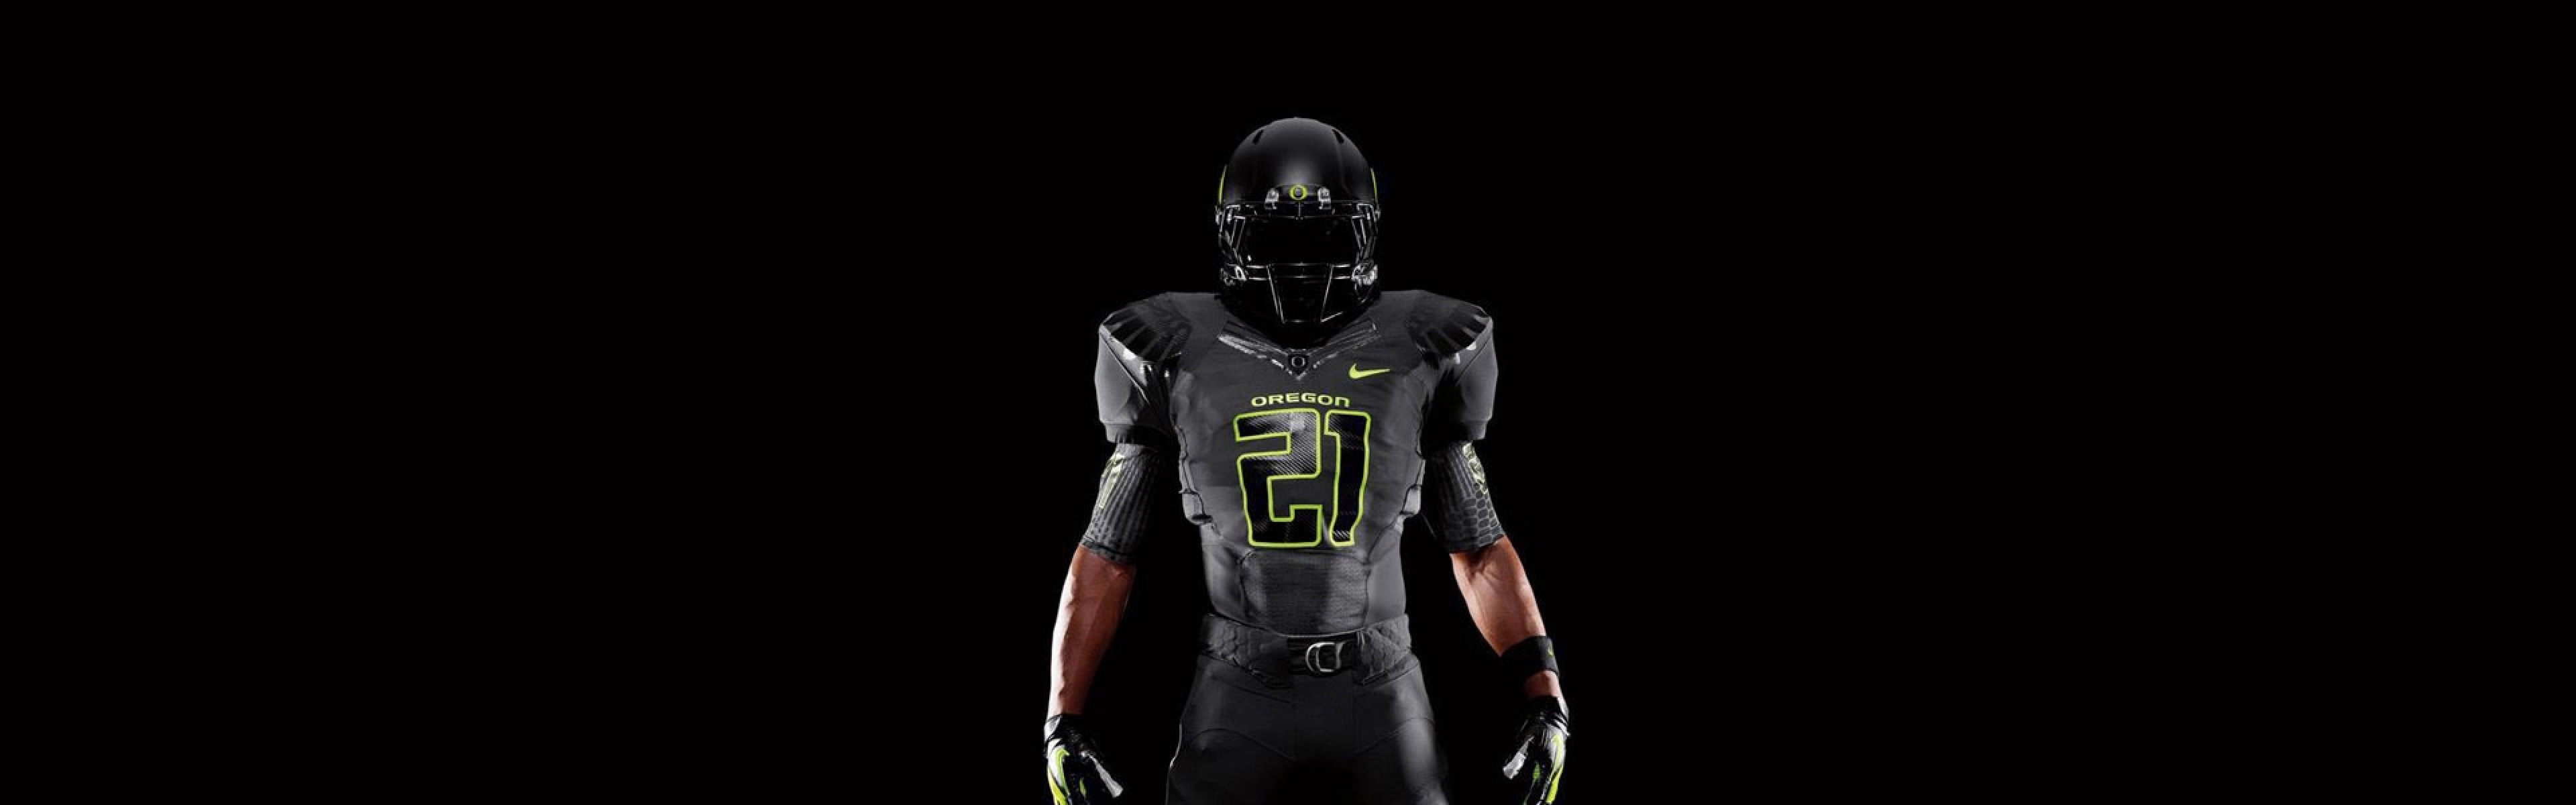 American Football Player Wallpapers High Quality Resolution - Oregon Ducks Uniforms 2012 , HD Wallpaper & Backgrounds